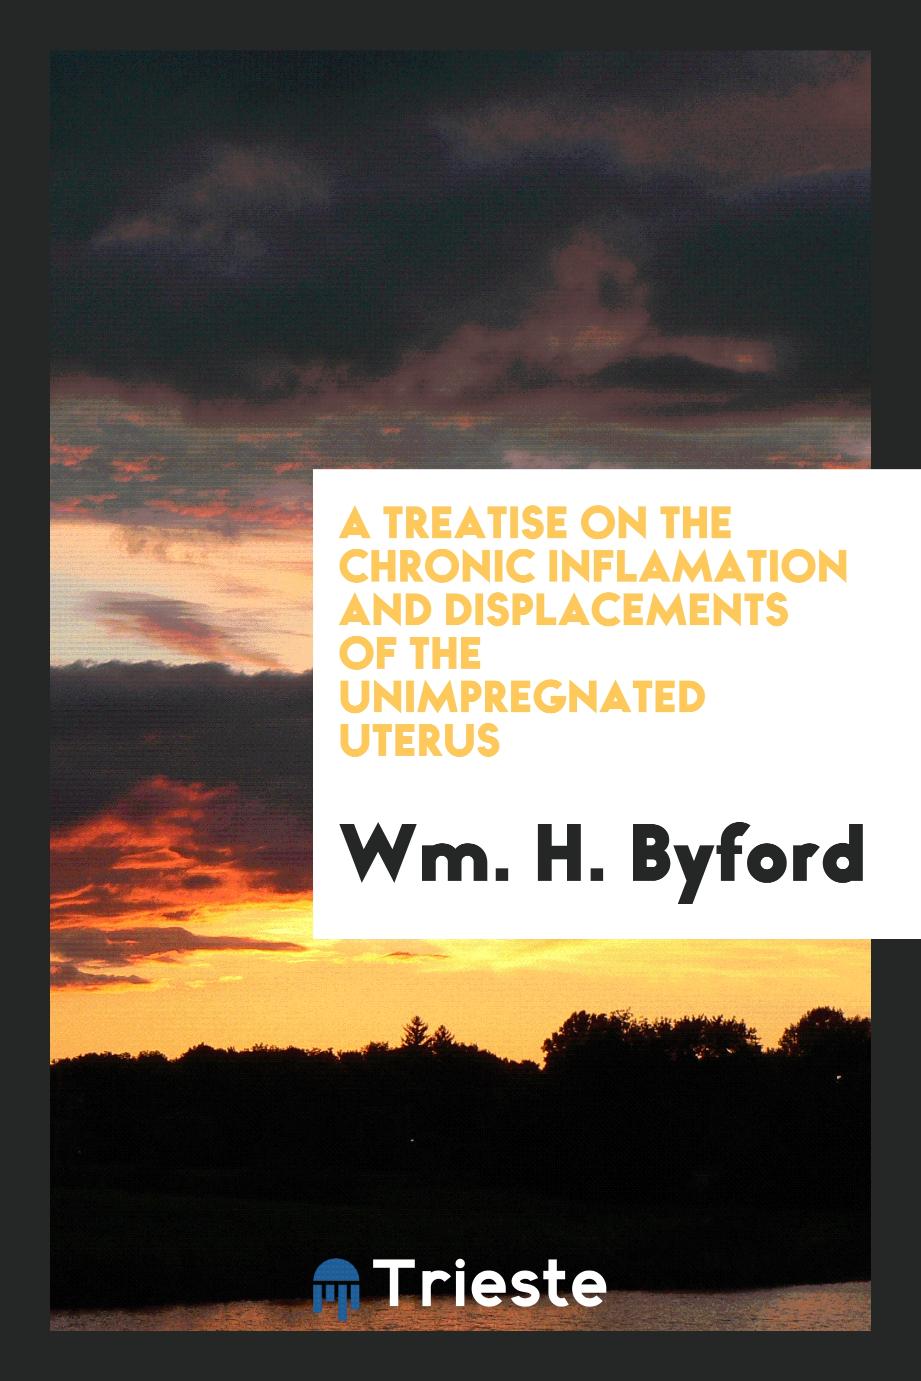 A Treatise on The Chronic Inflamation and Displacements of the Unimpregnated Uterus